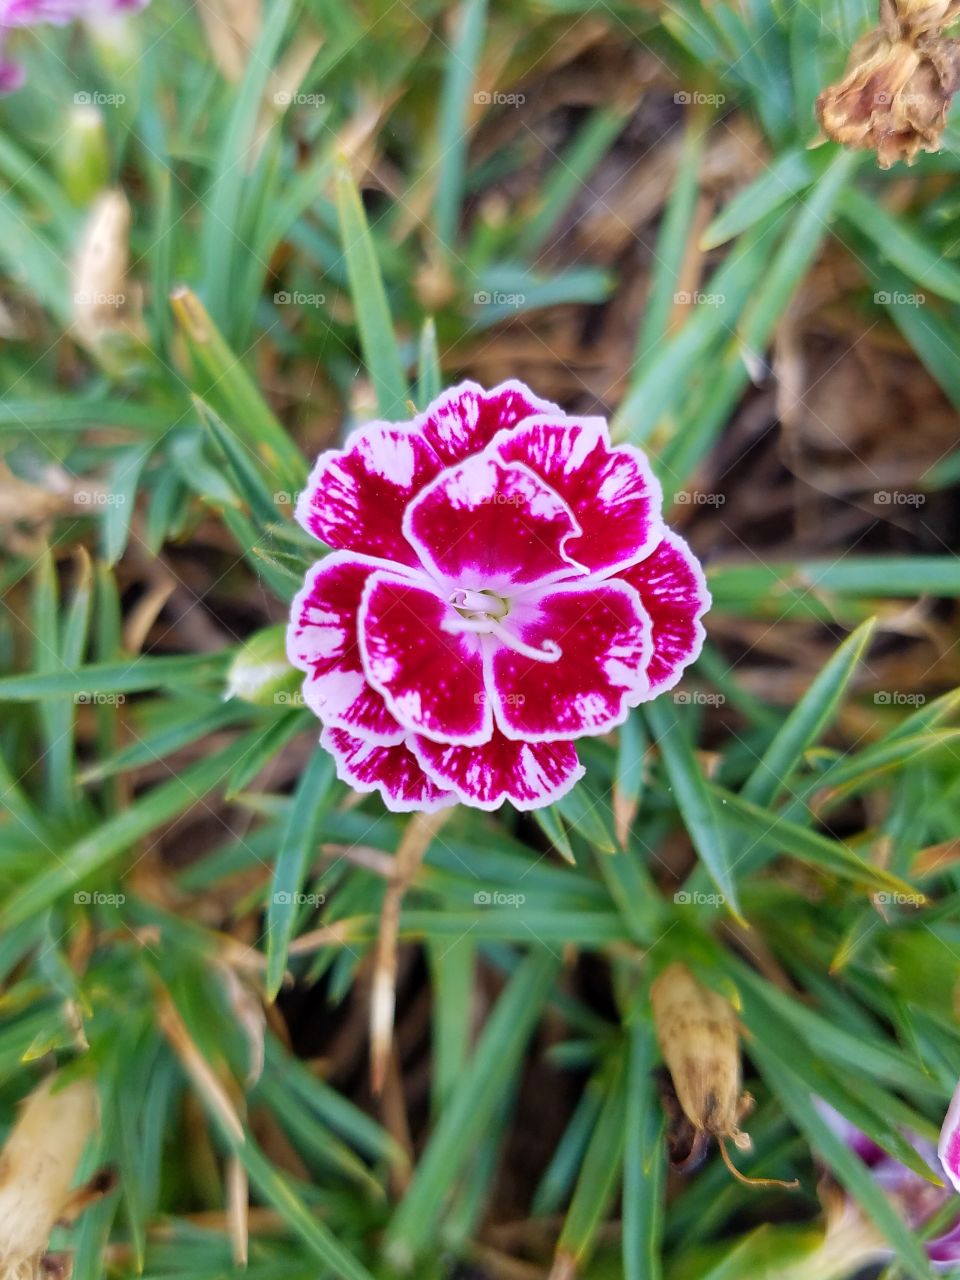 Sweet William looking lovely & pink this morning...